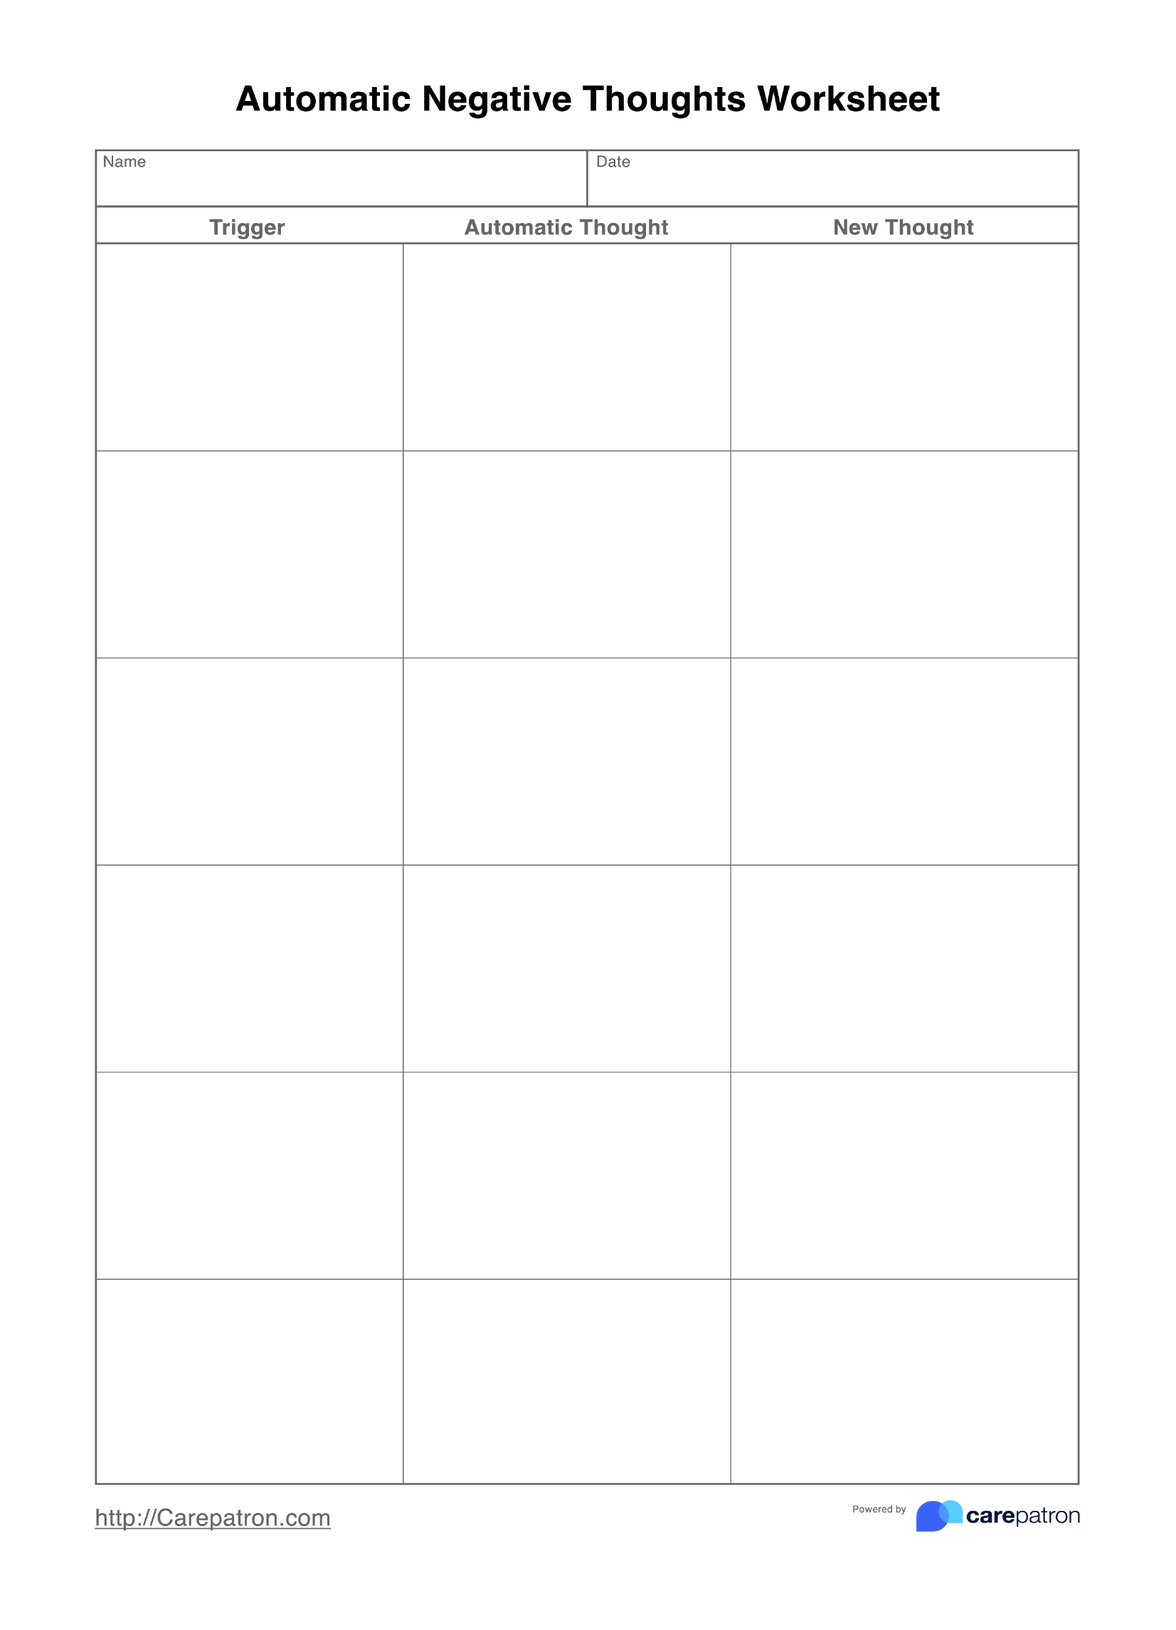 Automatic Negative Thoughts Worksheets PDF Example